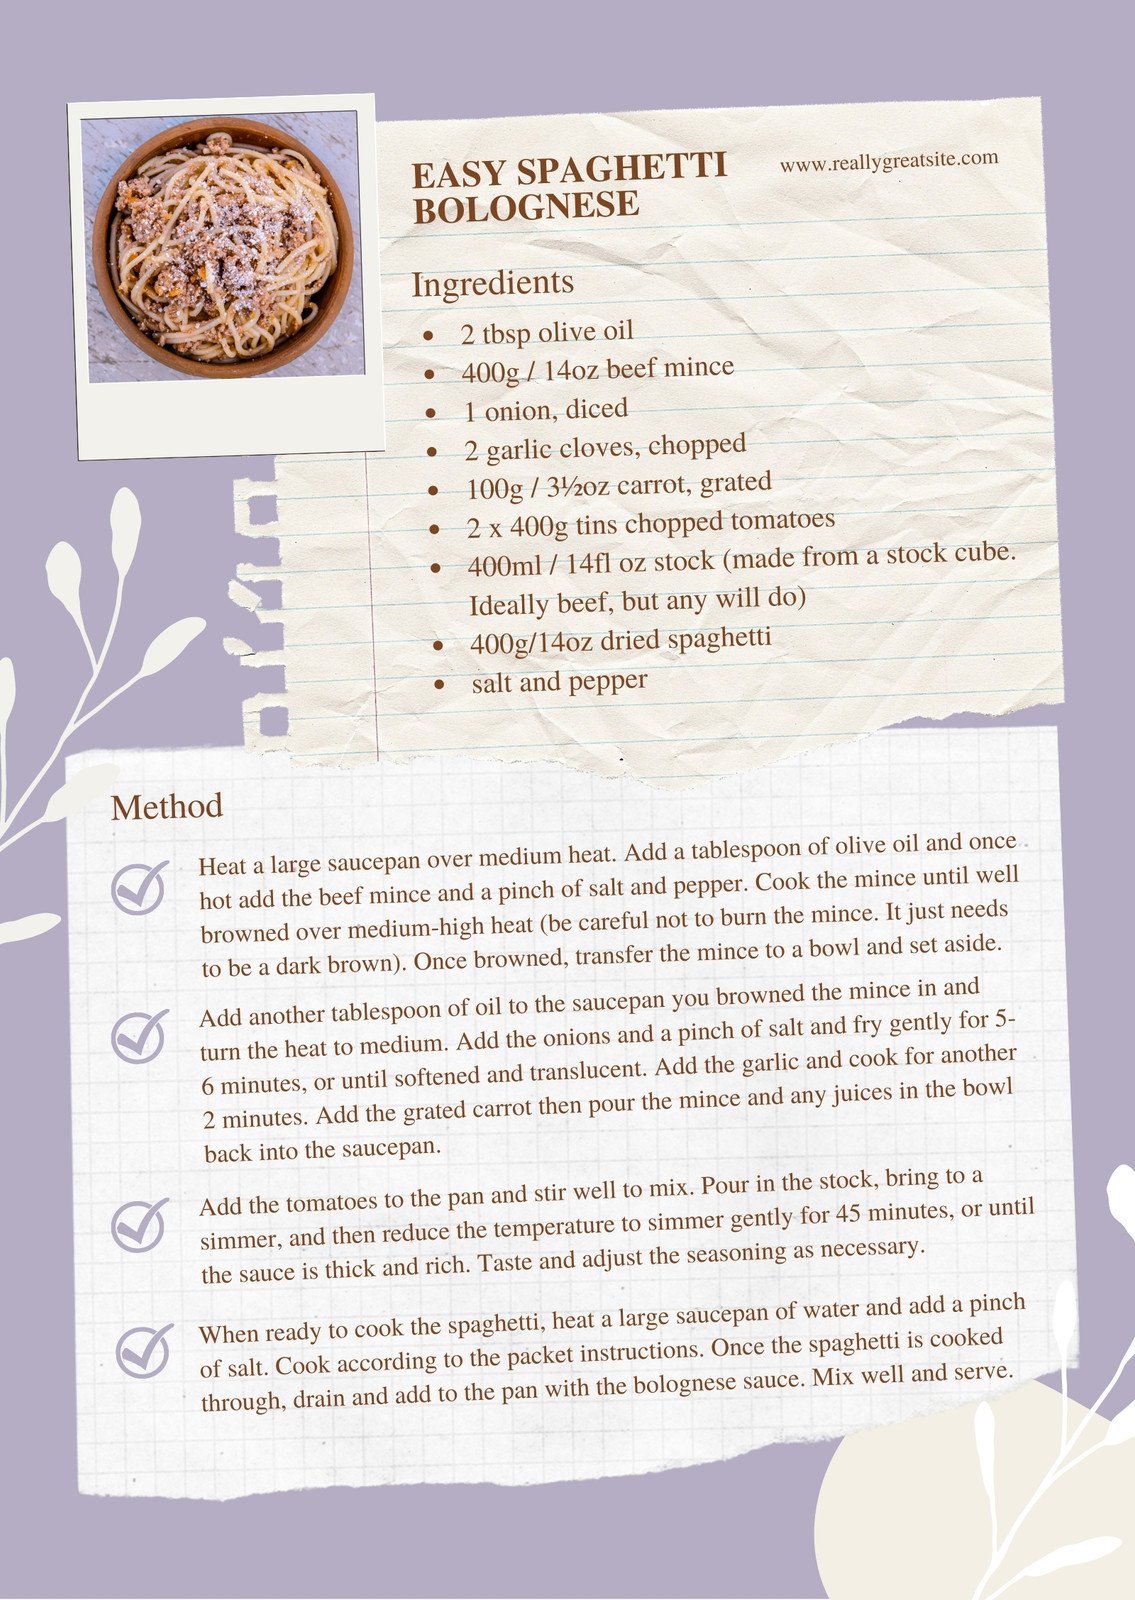 8 Tips For Making Recipe Scrapbook Pages